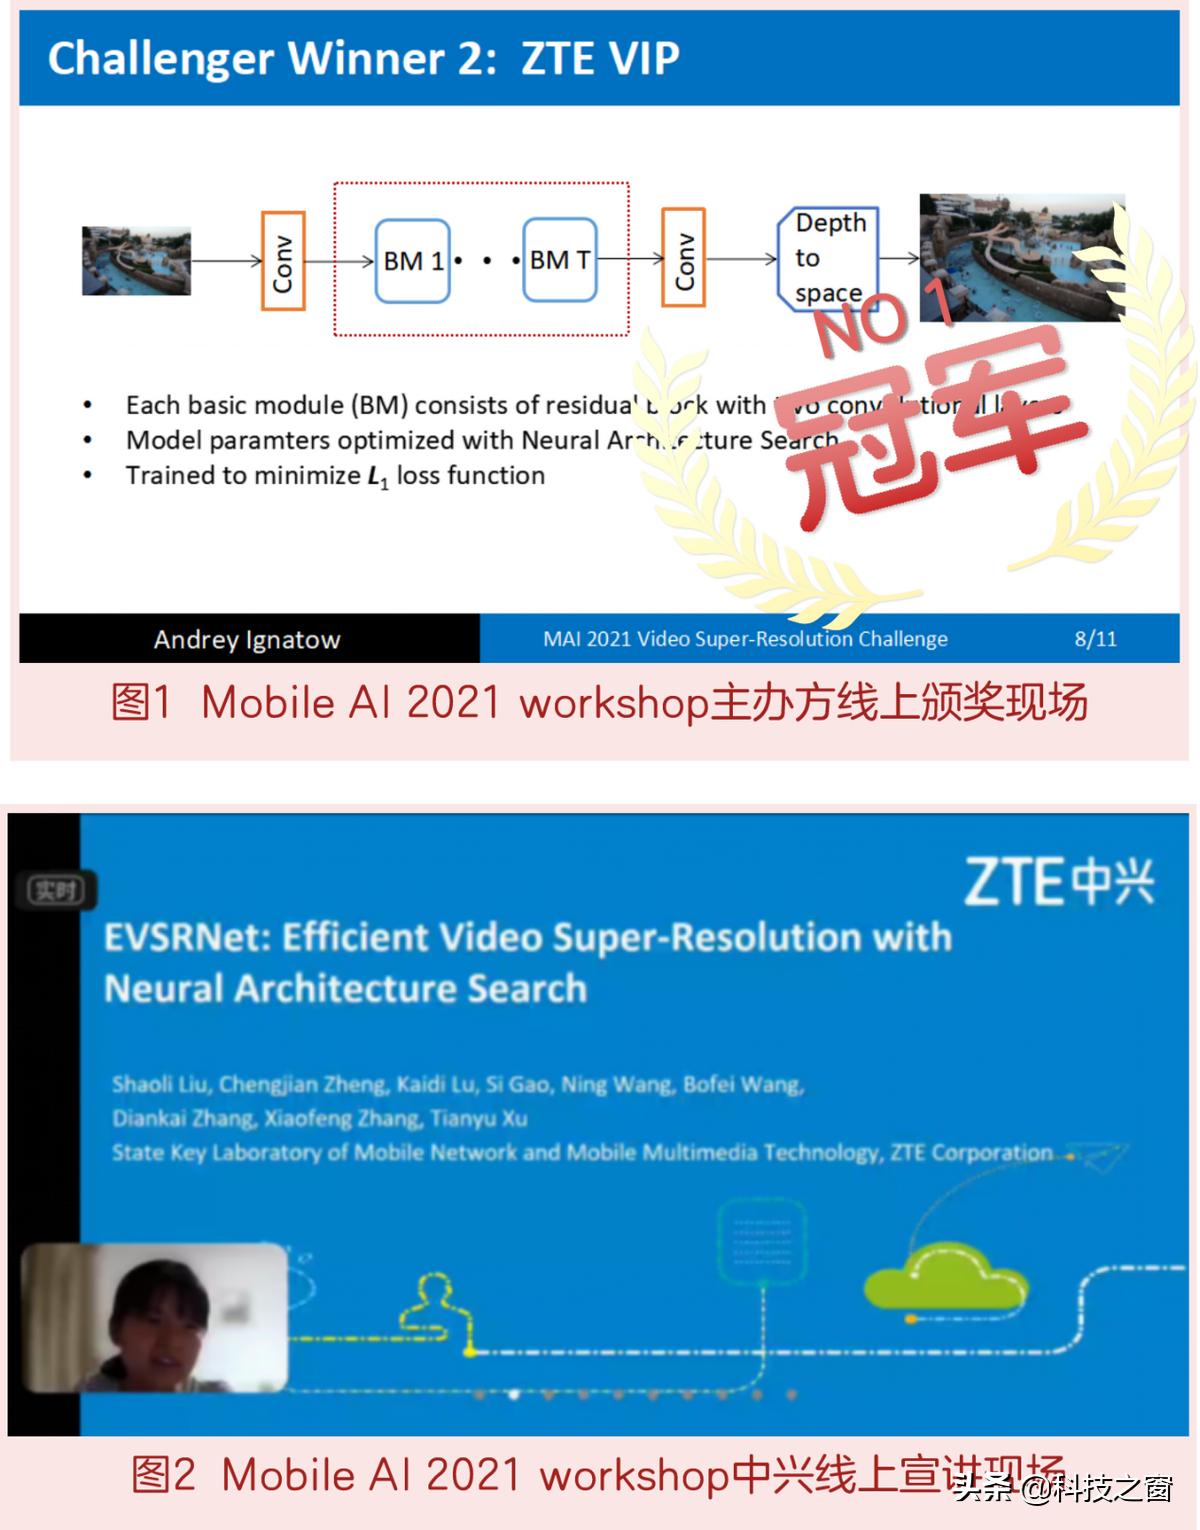 ZTE has won many awards in the world's top computer vision conferences